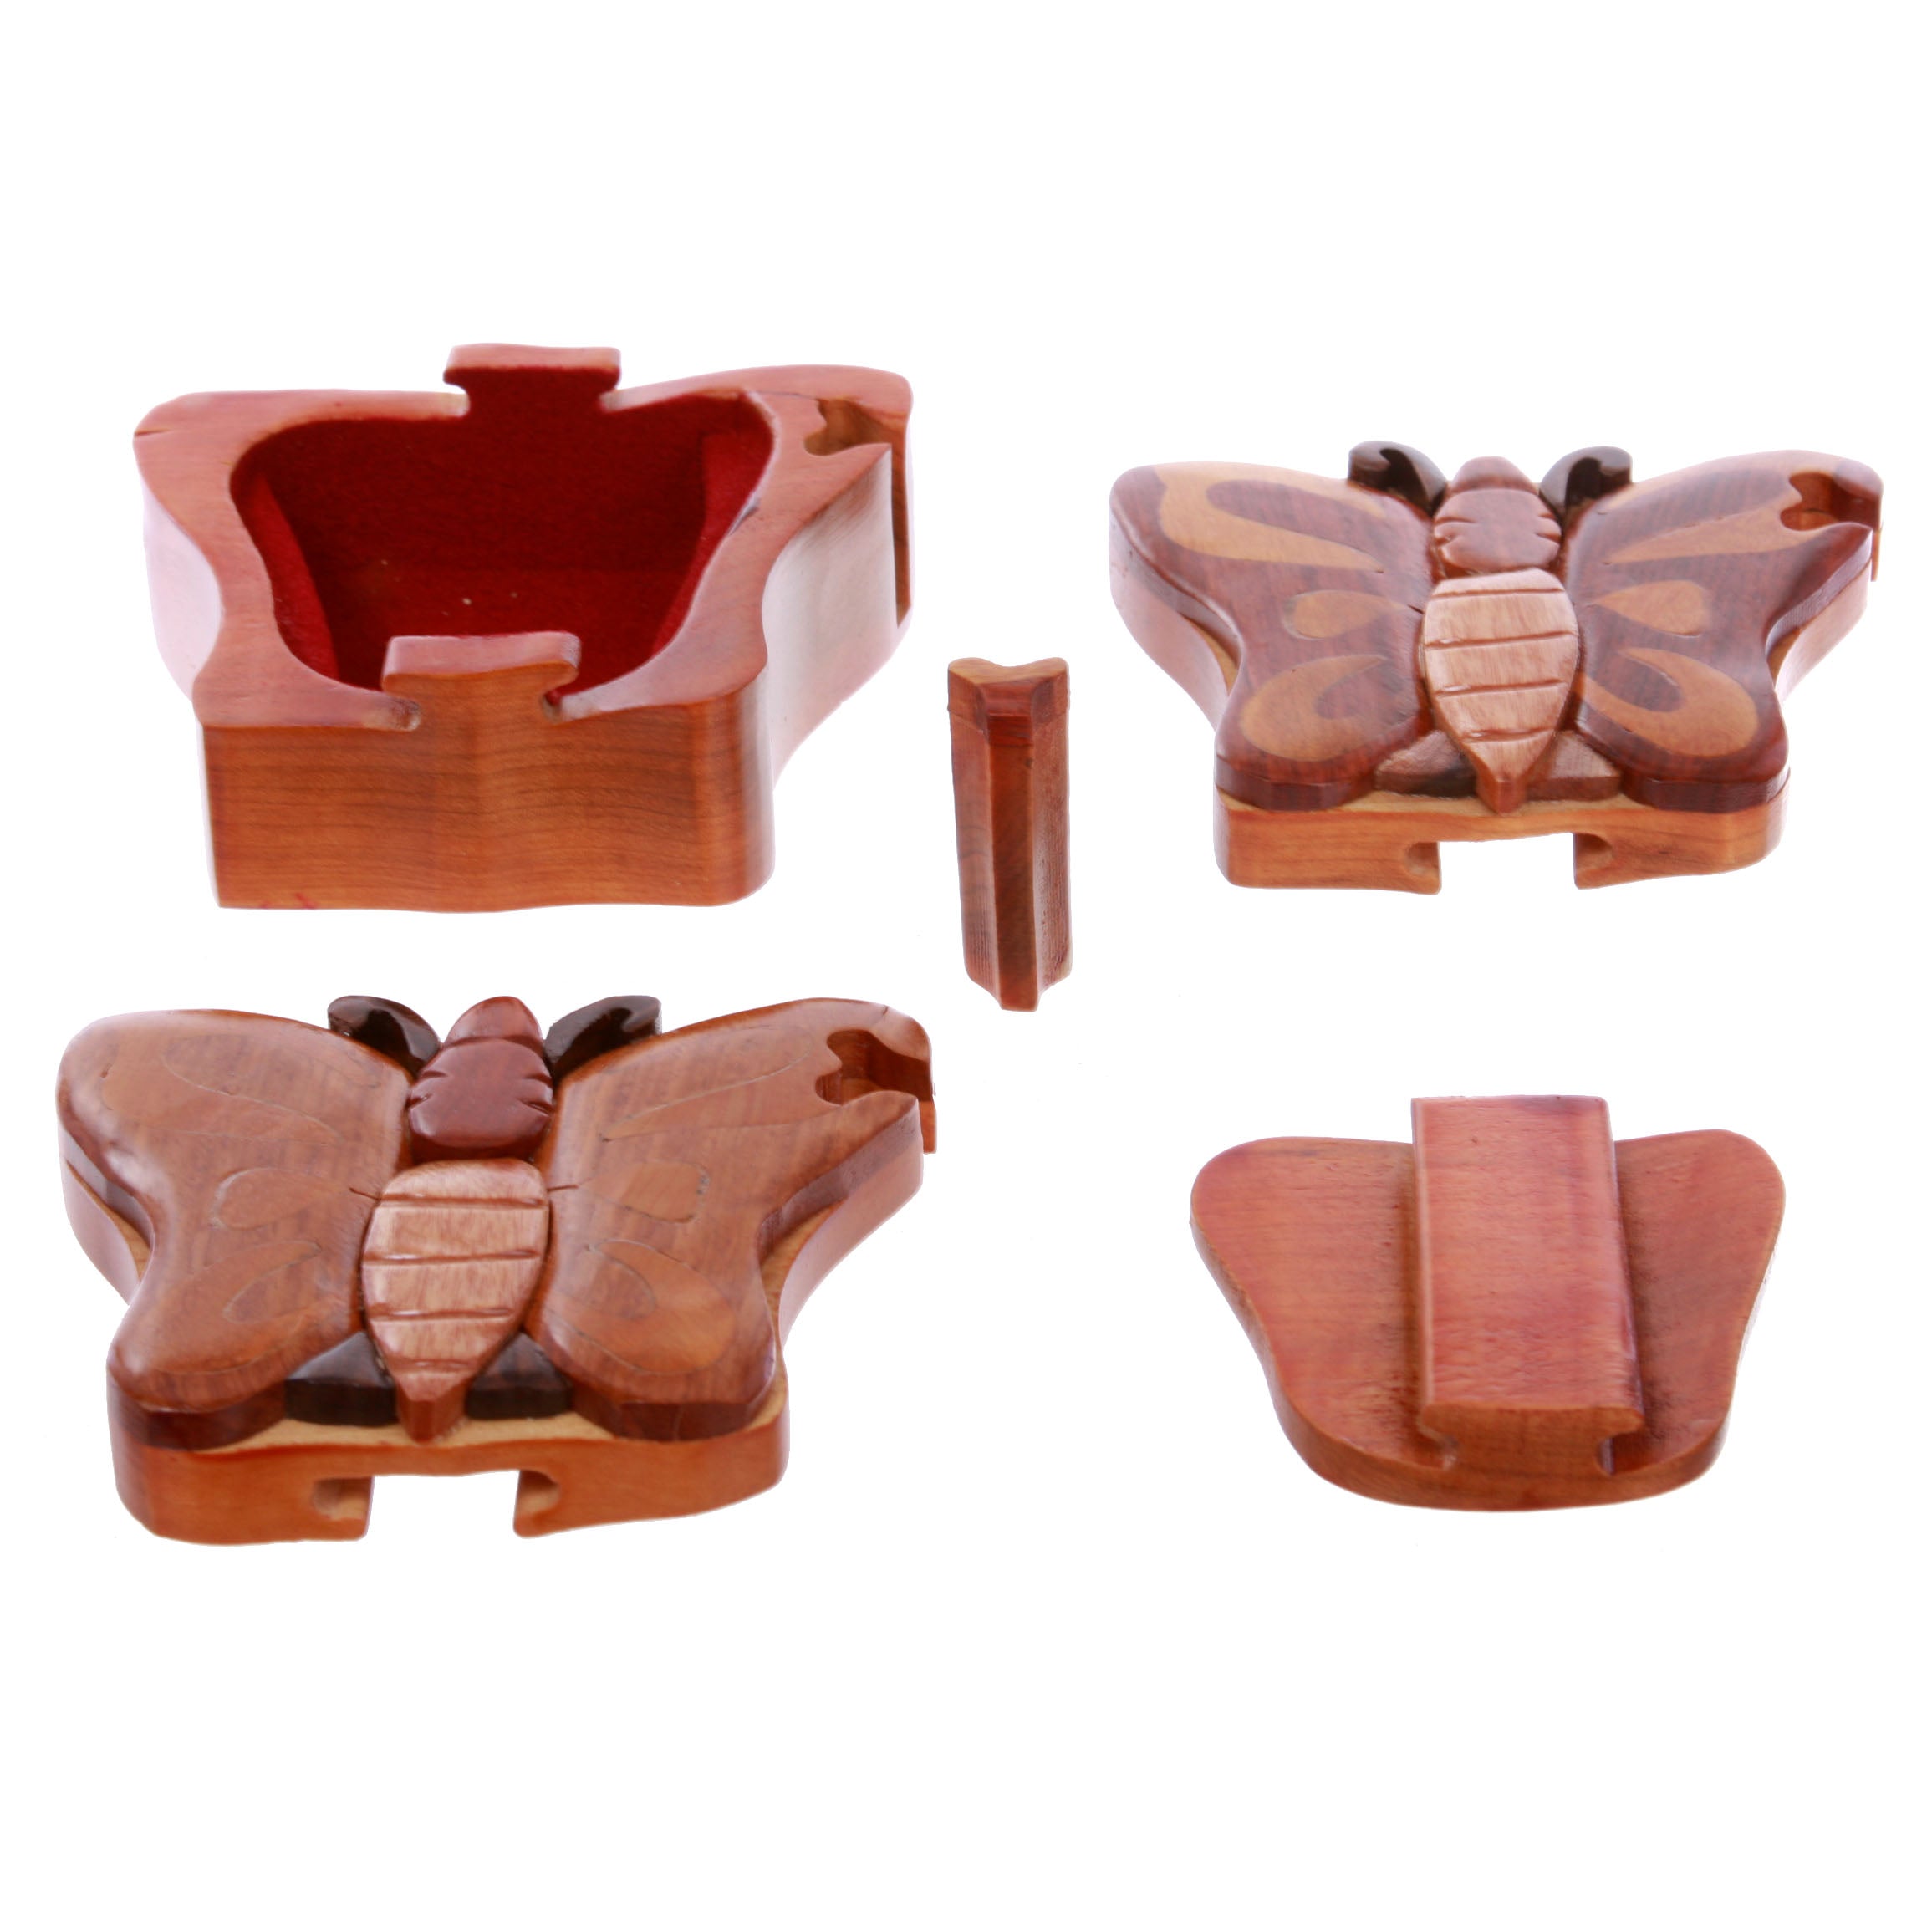 Butterfly Handcrafted Wooden Secret Jewelry Puzzle Box - Butterfly